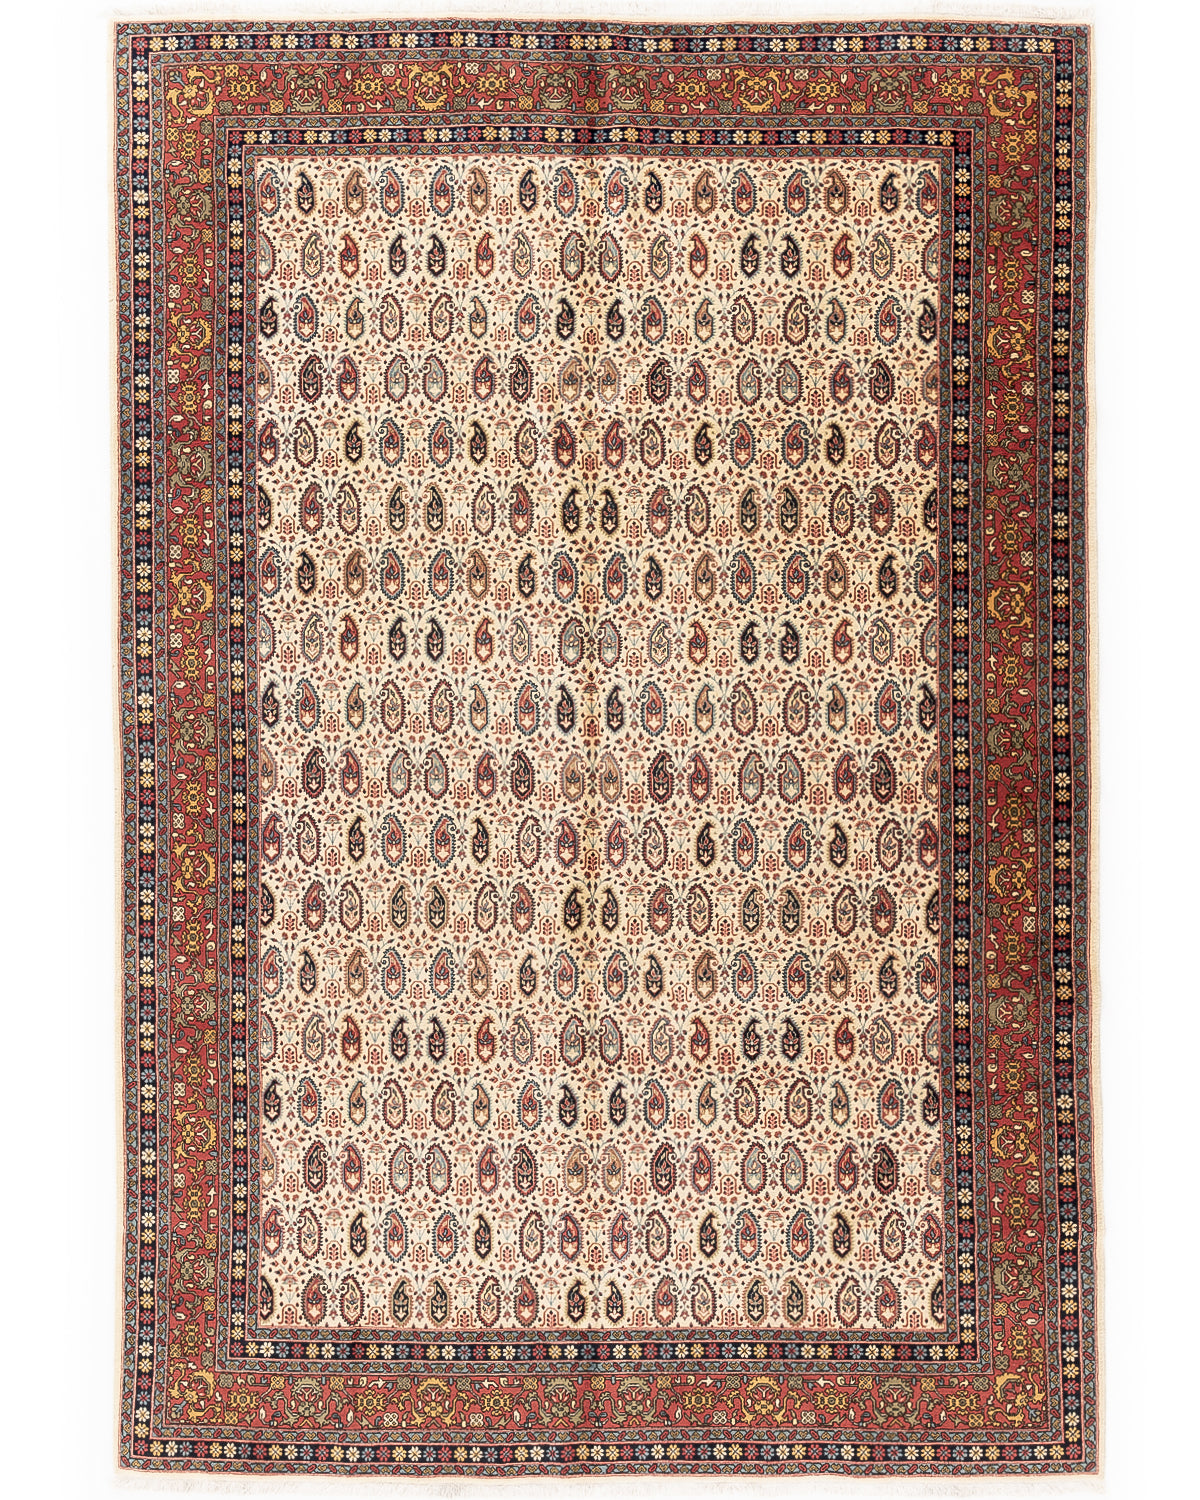 Oriental Rug Hereke Hand Knotted Wool On Cotton 202 X 292 Cm - 6' 8'' X 9' 7'' ER23